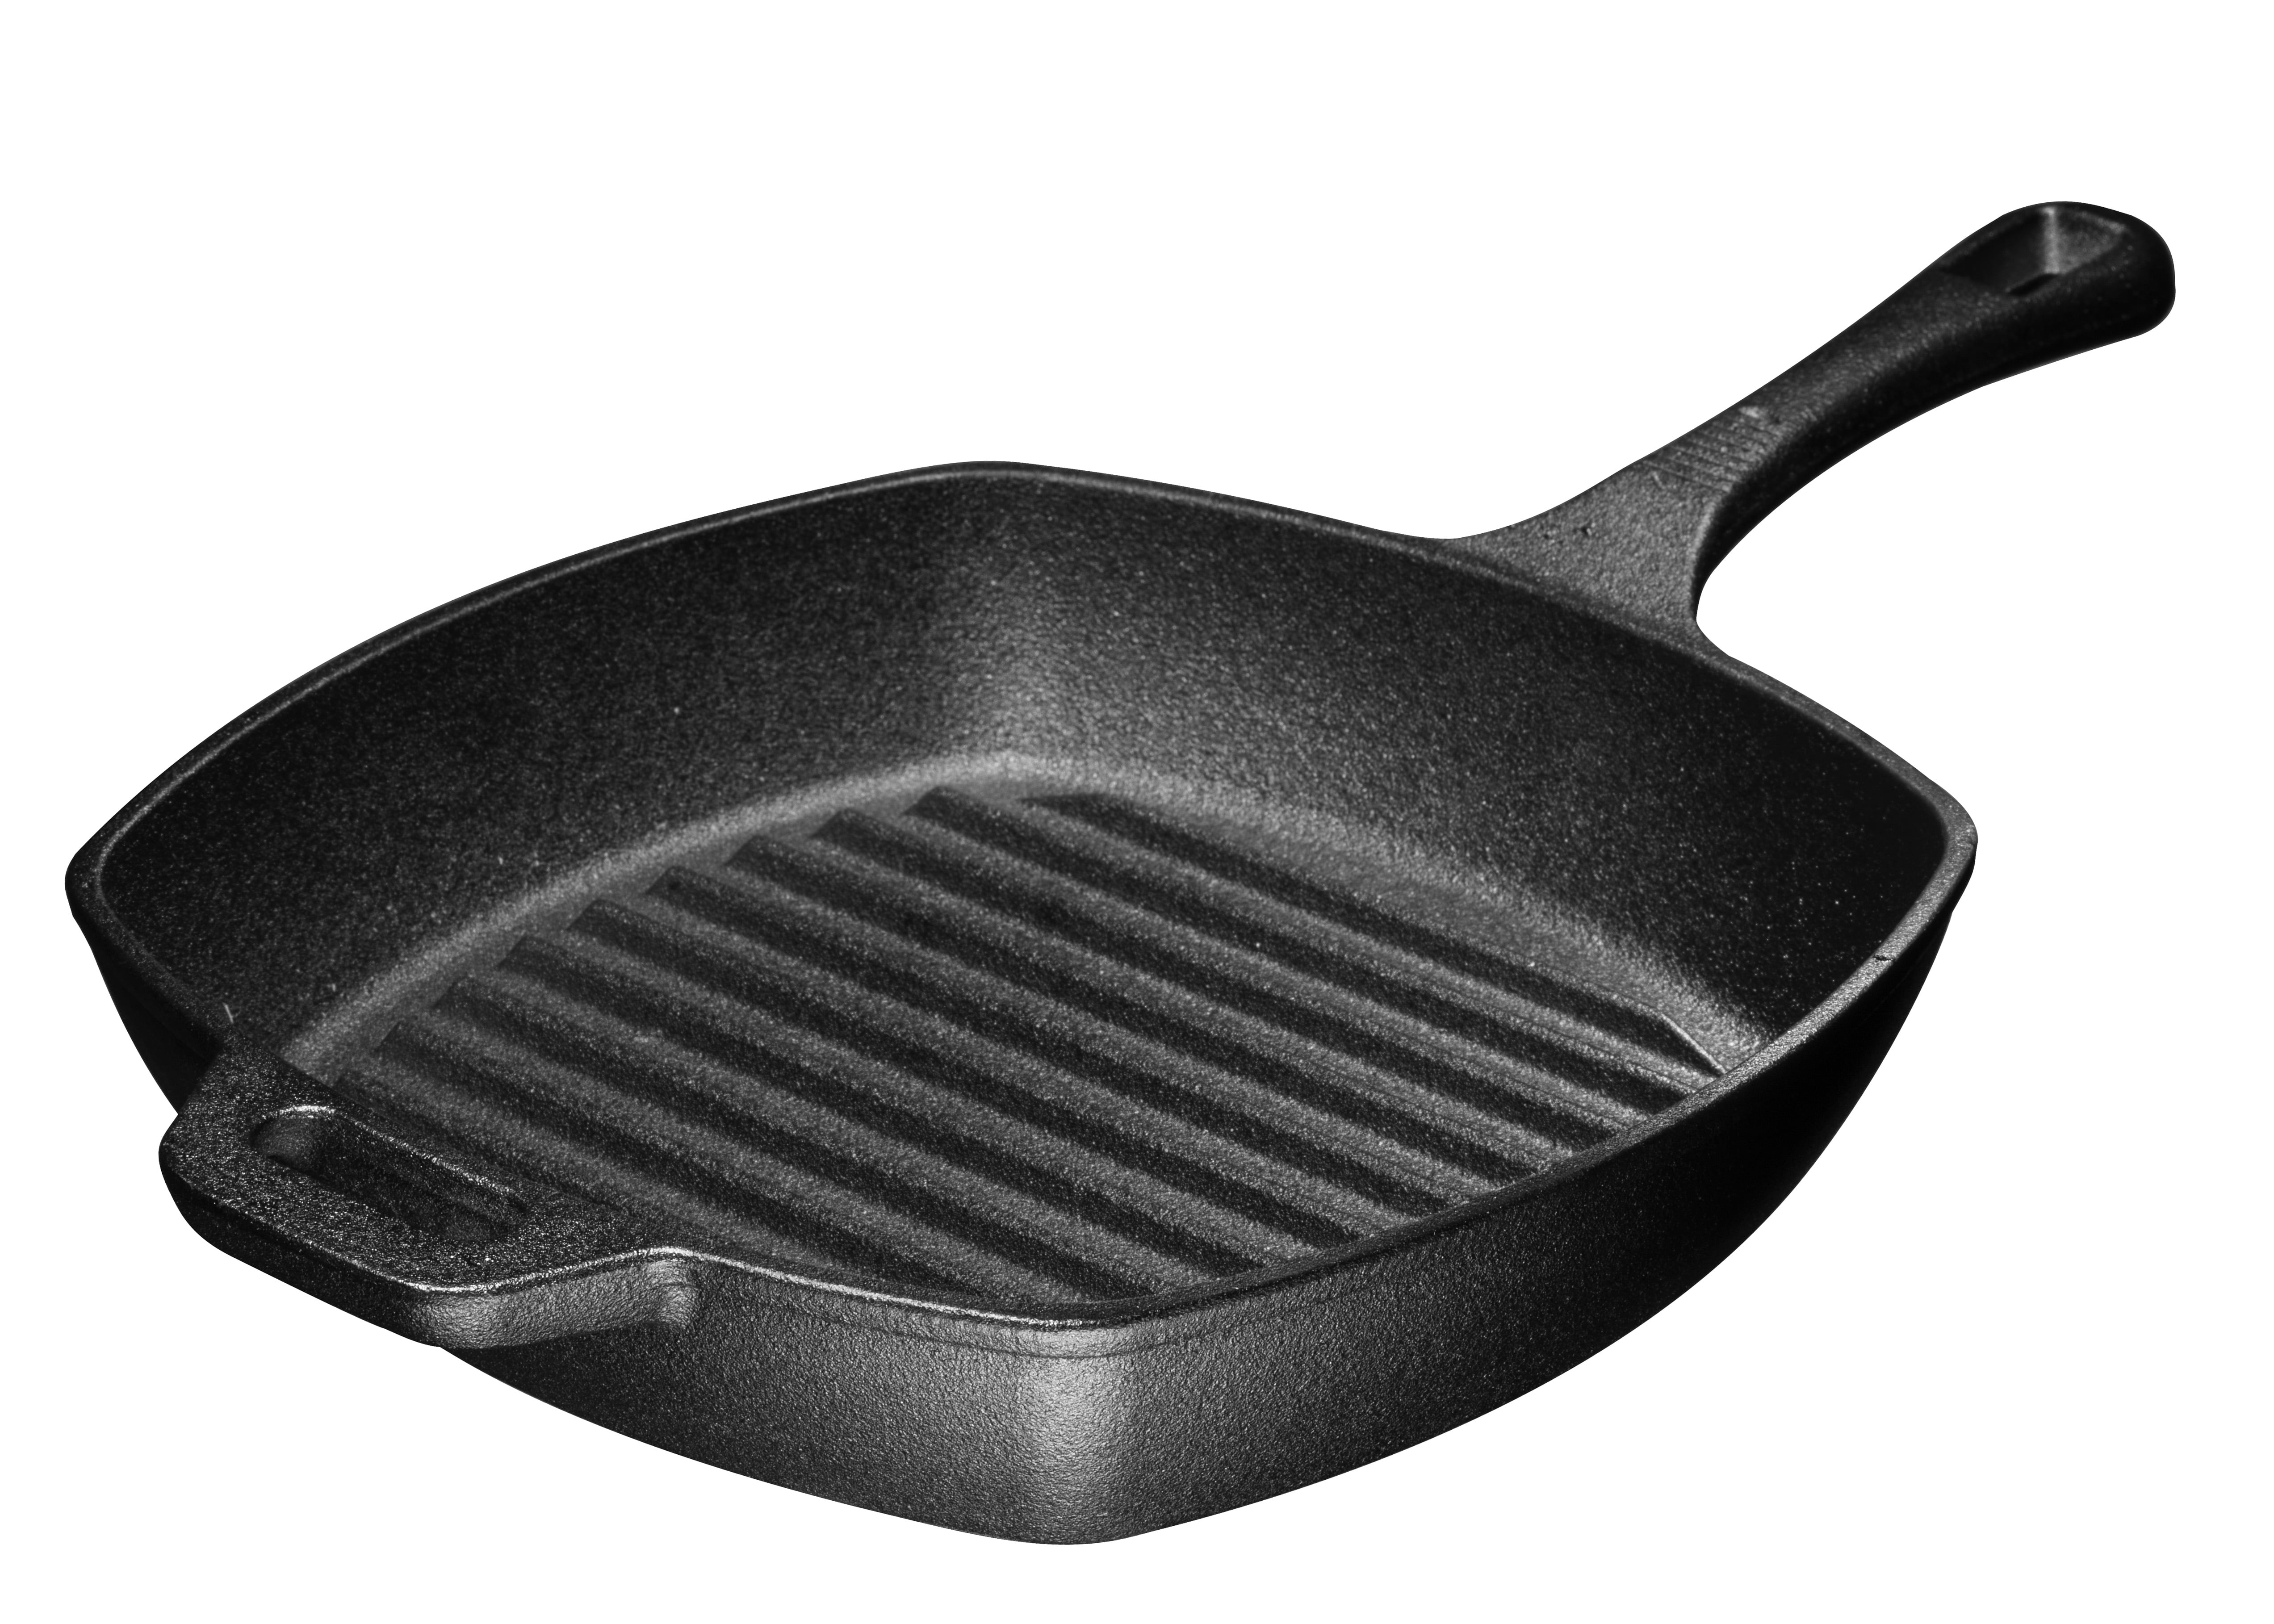 Fancy Cook Enamel Cast Iron Green Square Grill Pan 10 1/2-Inch on Sale! 